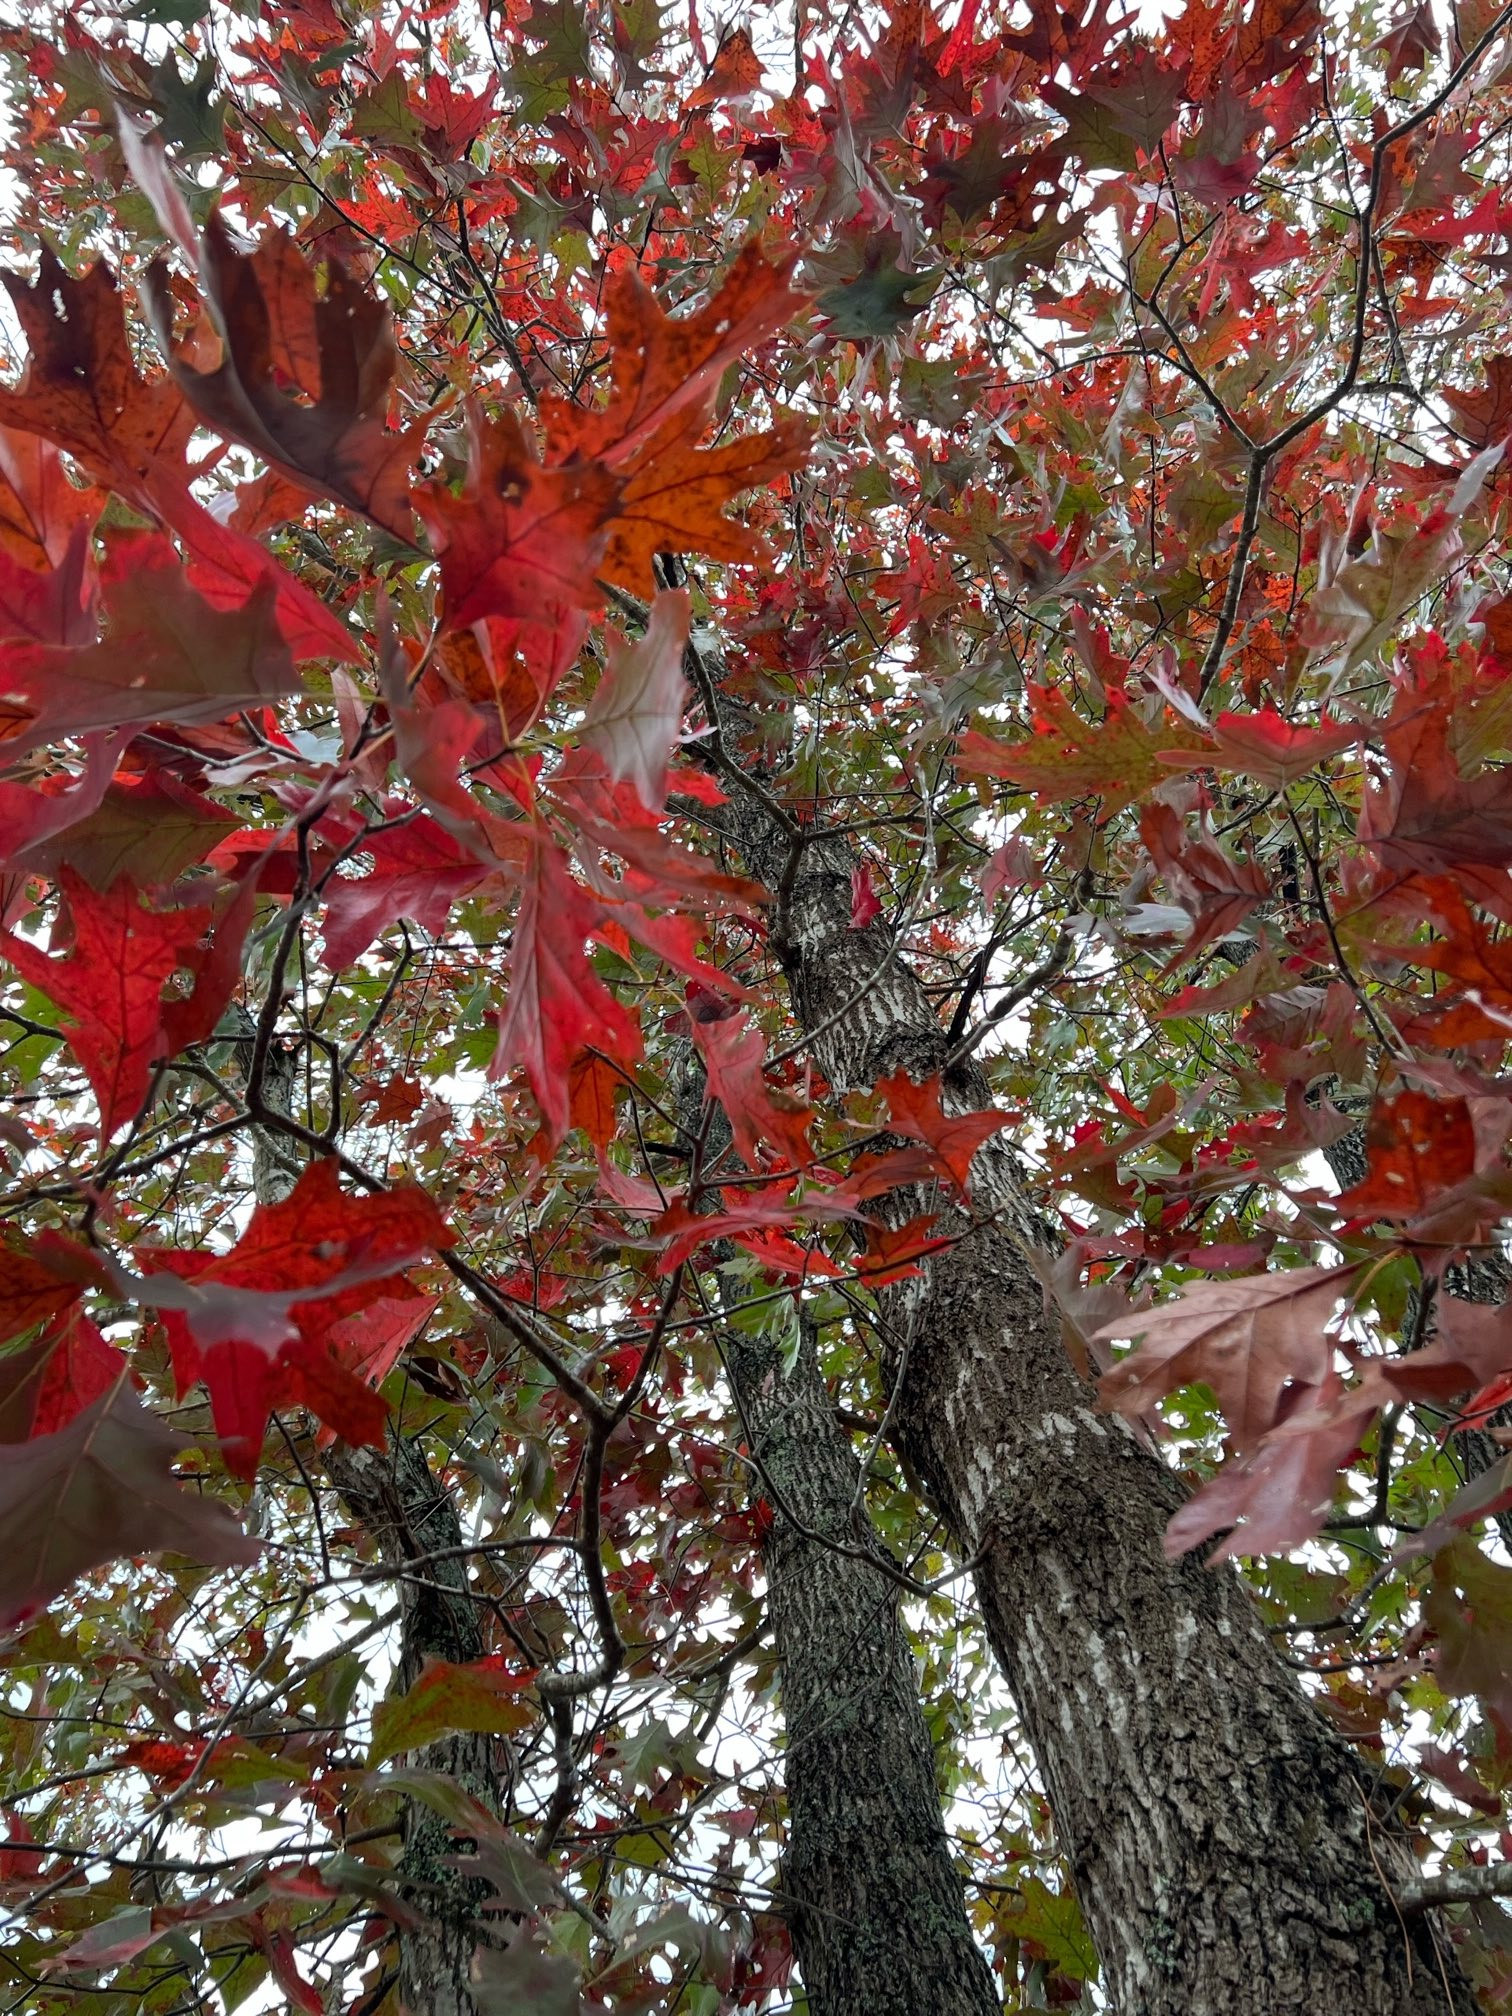 The Scientific Name is Quercus rubra. You will likely hear them called Northern Red Oak. This picture shows the Nice Fall color! The bark on mature trees has flat-topped, wide ridges with shallow furrows. The shallow furrows form a pattern resembling ski tracts. of Quercus rubra